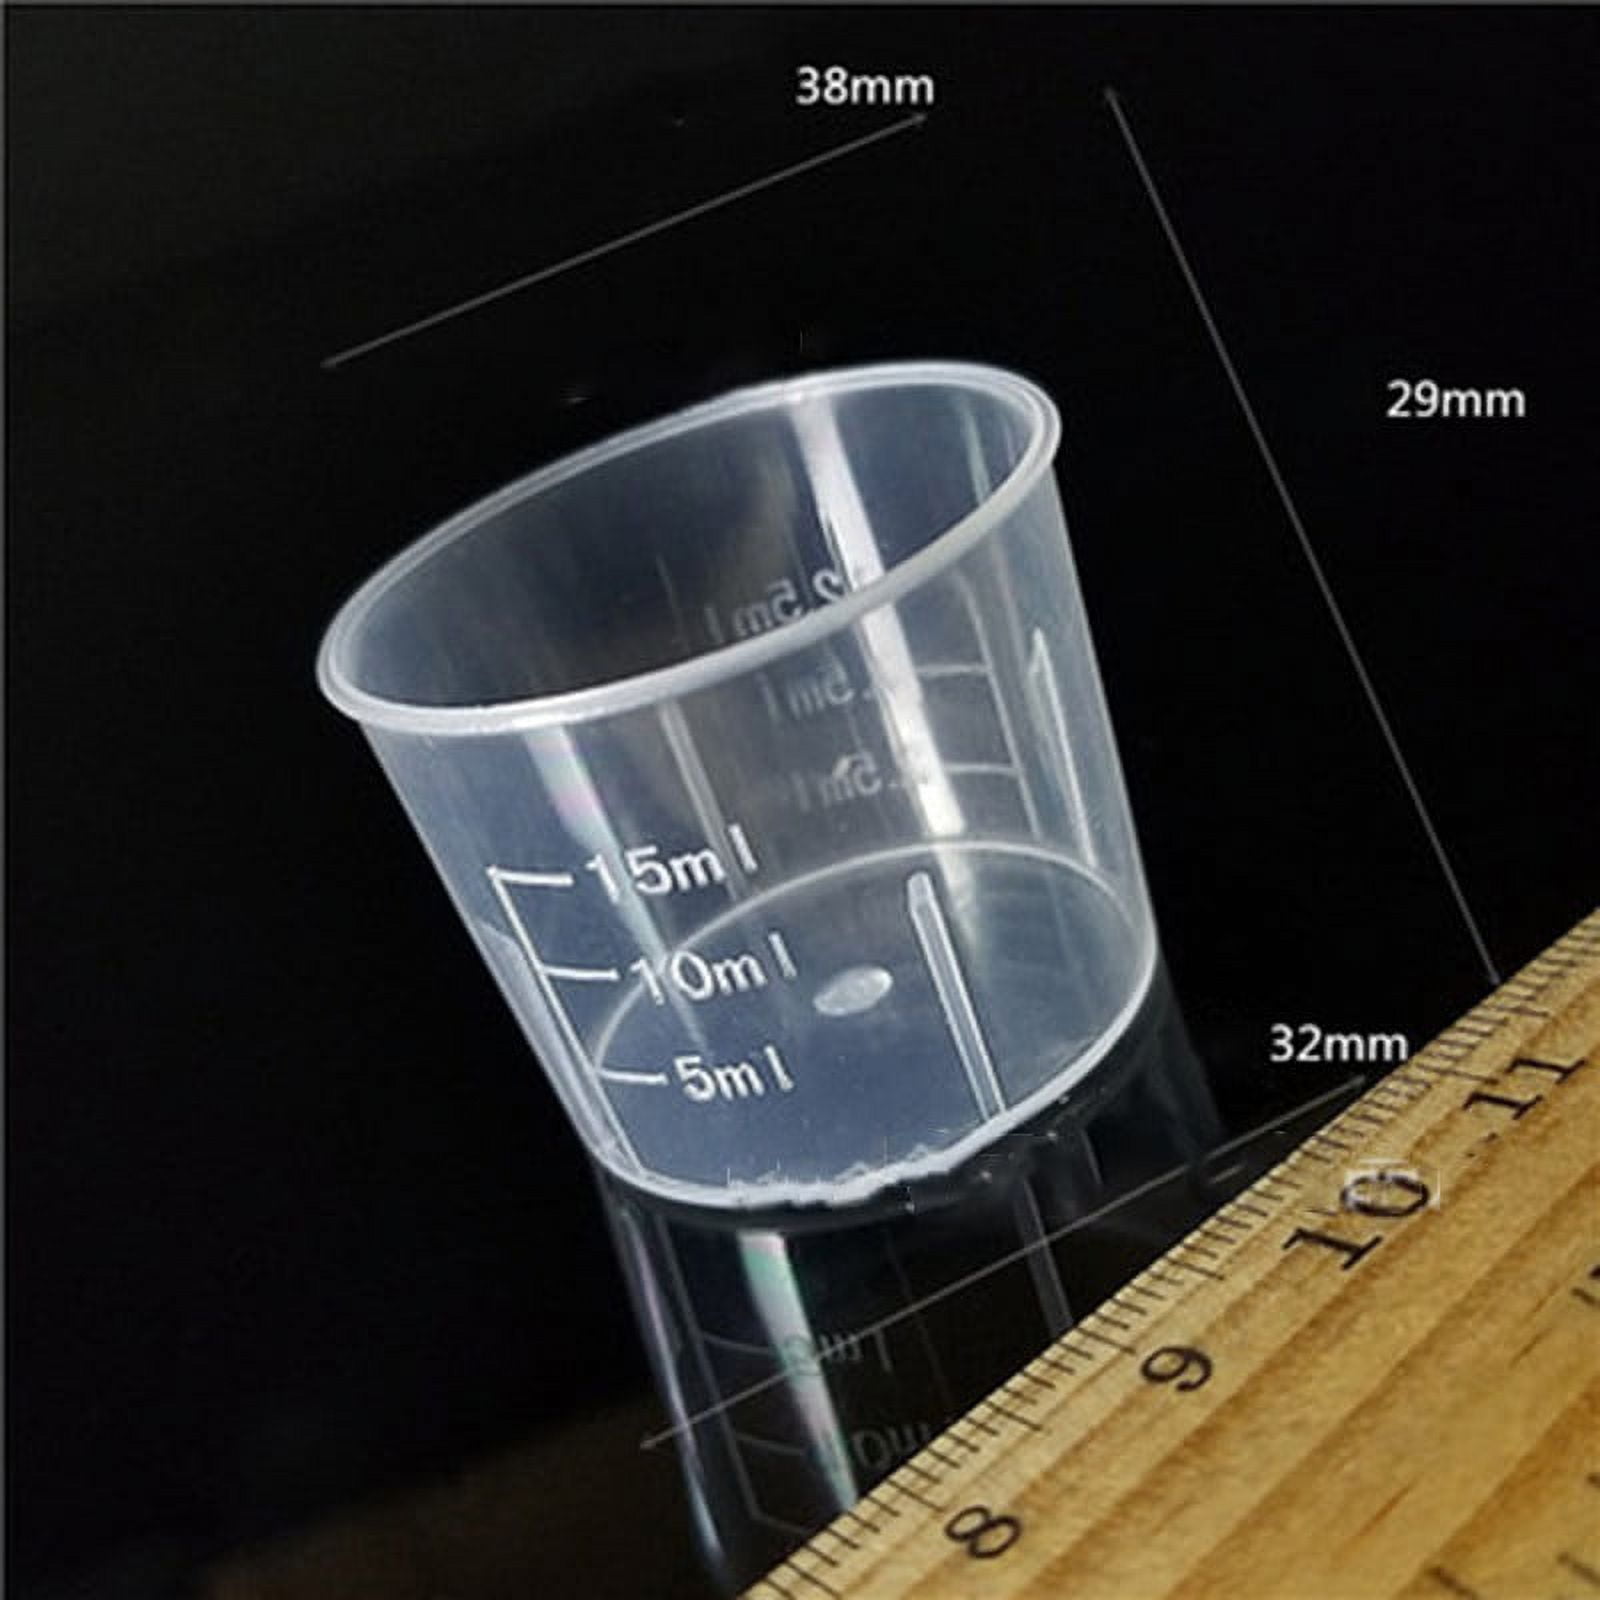 Vctitil 15ML Measuring Cup, Plastic Transparent Mini Measuring Cup with Red  Measurements, Simple Clear Coffee Cup Milk Powder Cup Mini Measuring Cup